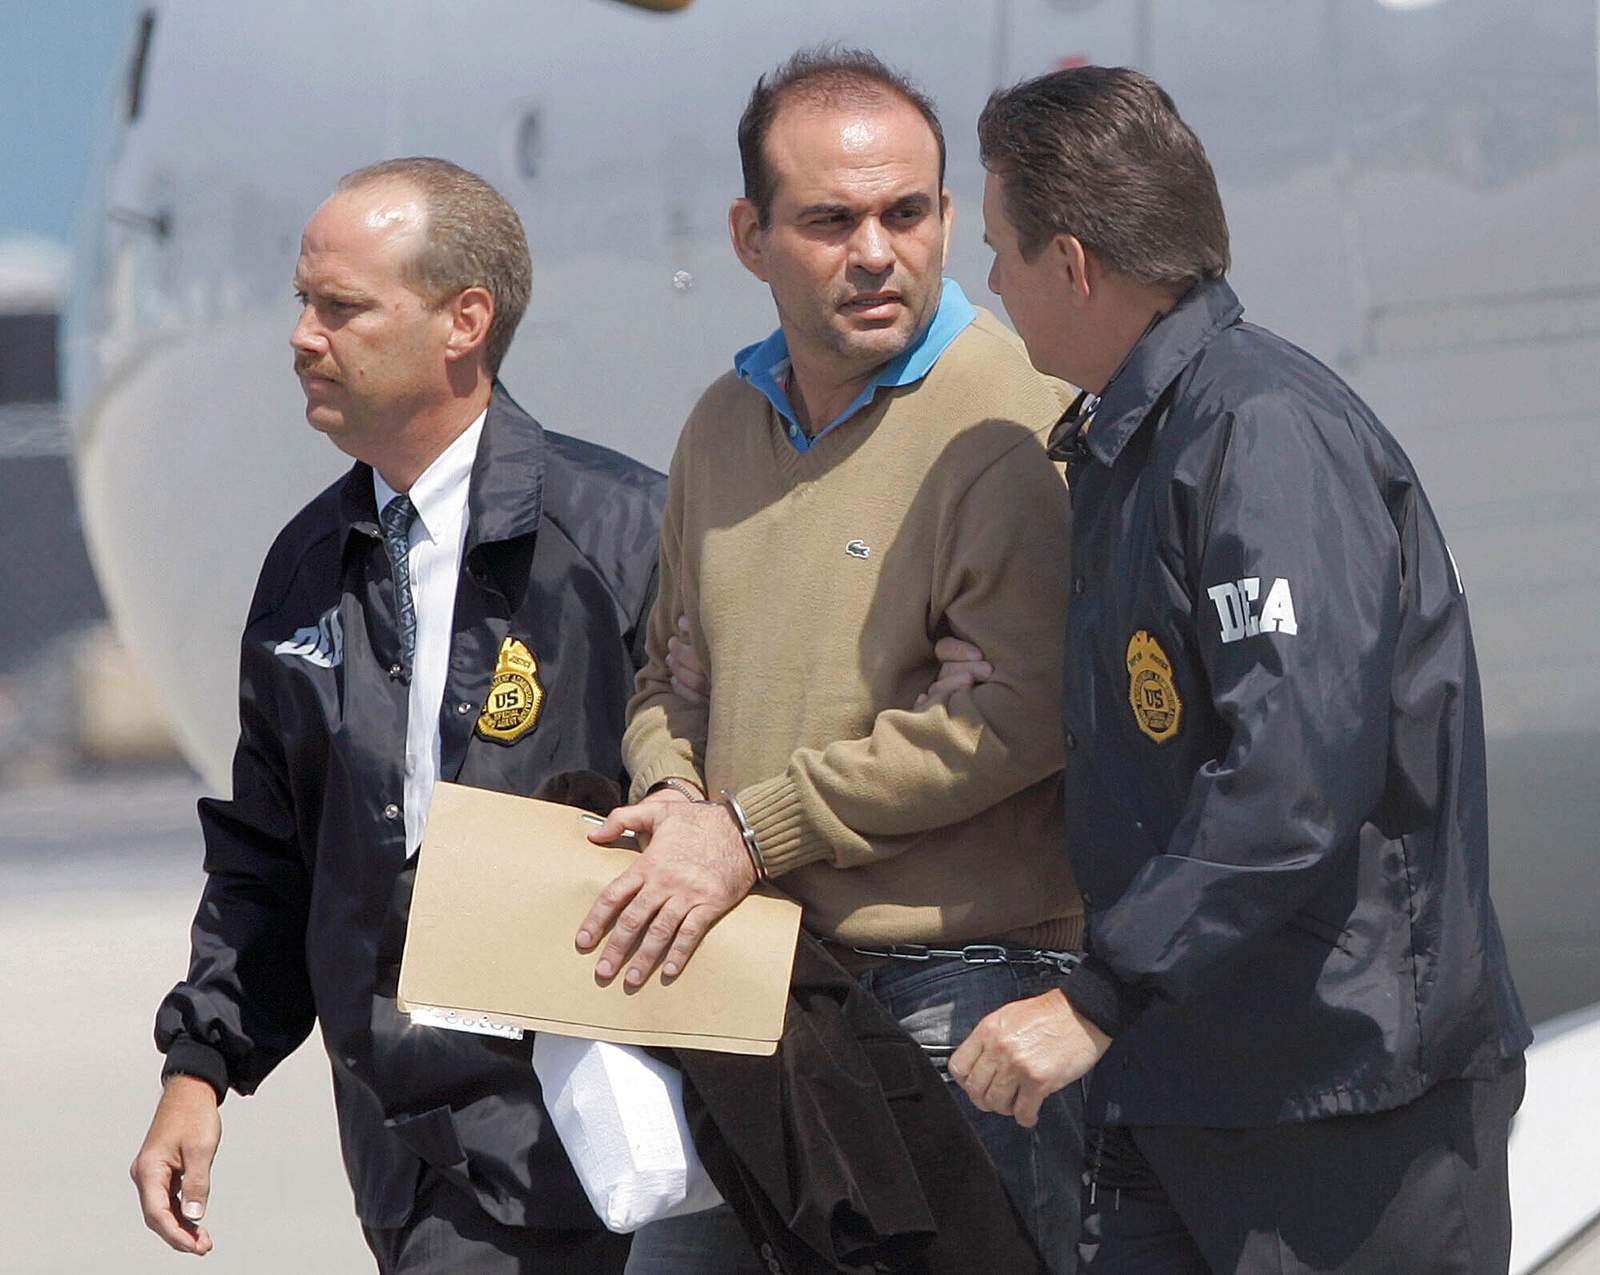 Colombia warlord asks US court to force deportation to Italy